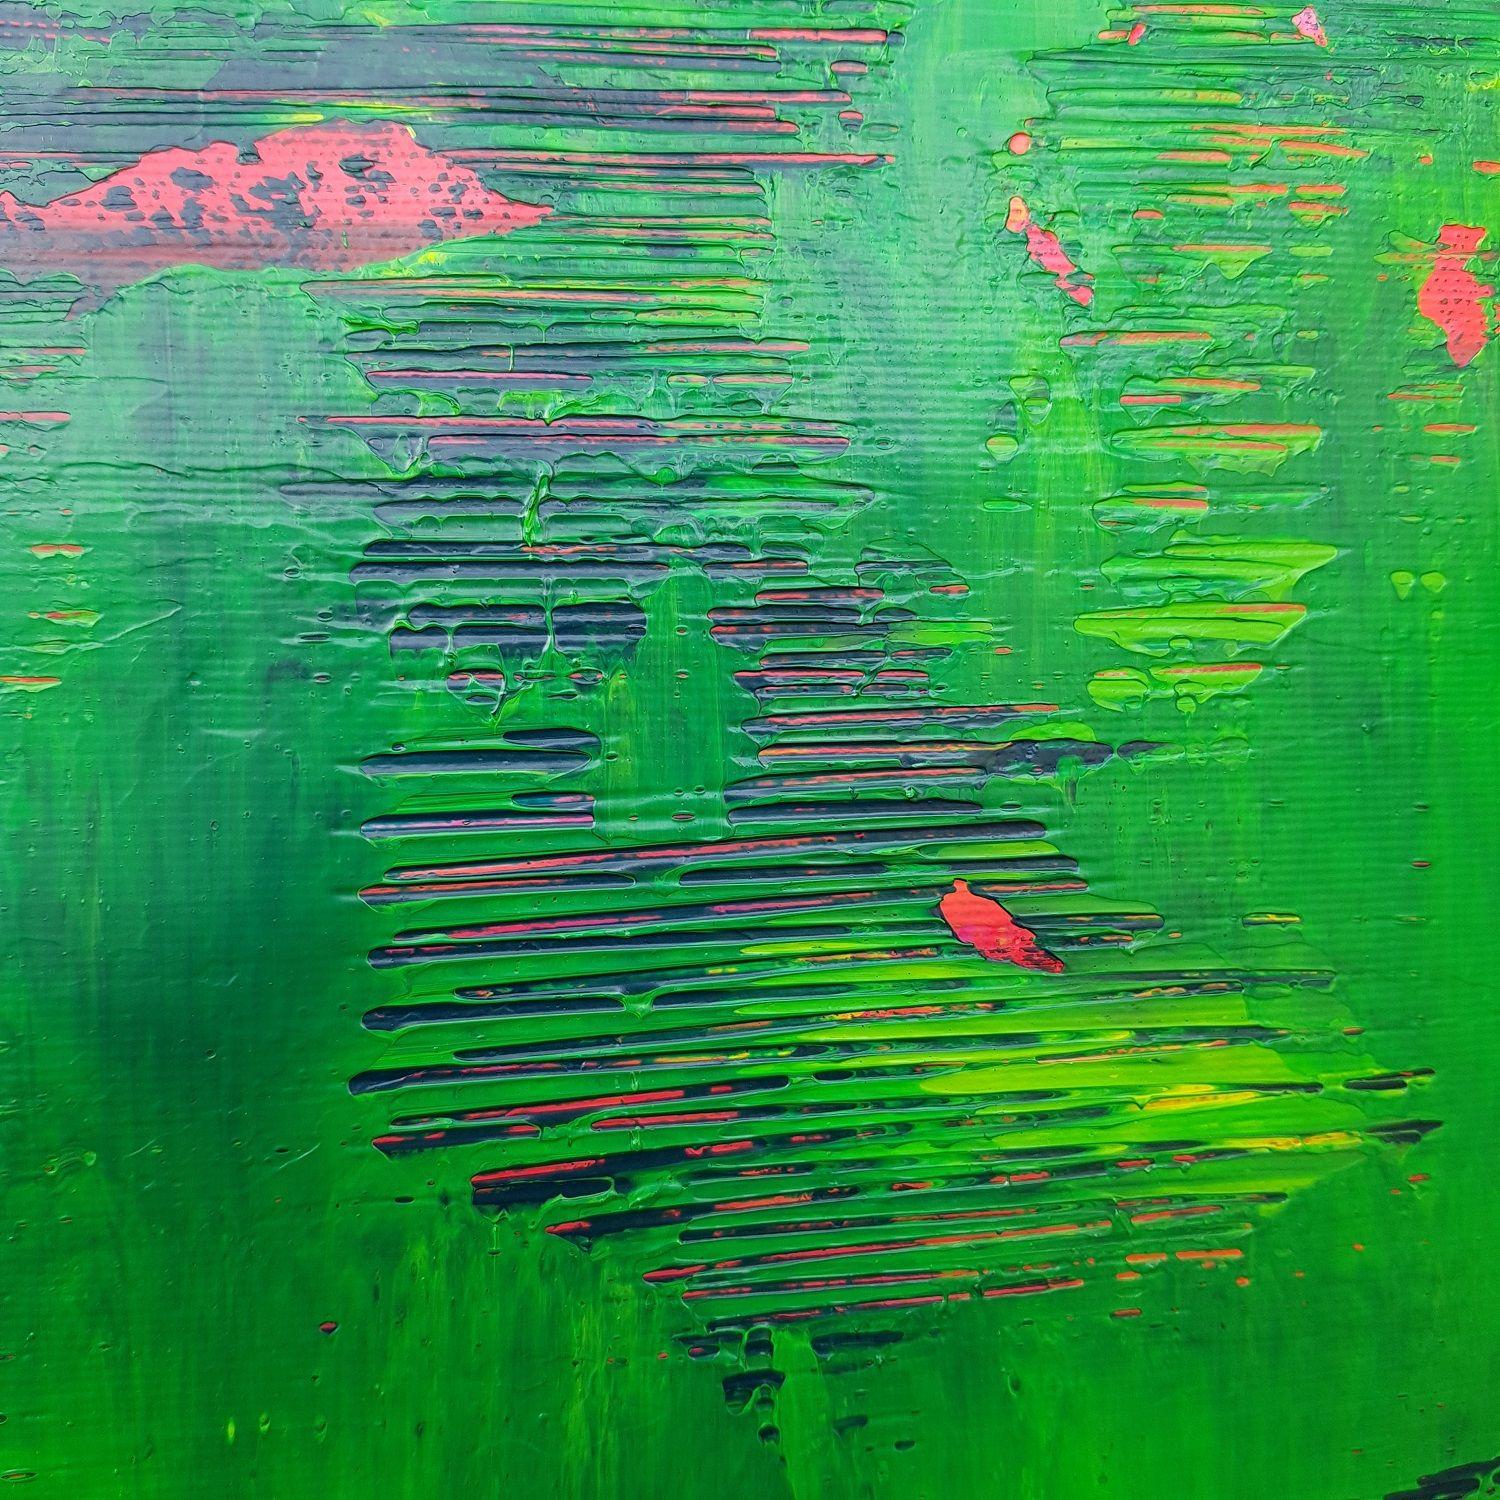 Deep in Costa Rica, Painting, Acrylic on Canvas - Green Abstract Painting by Ivana Olbricht